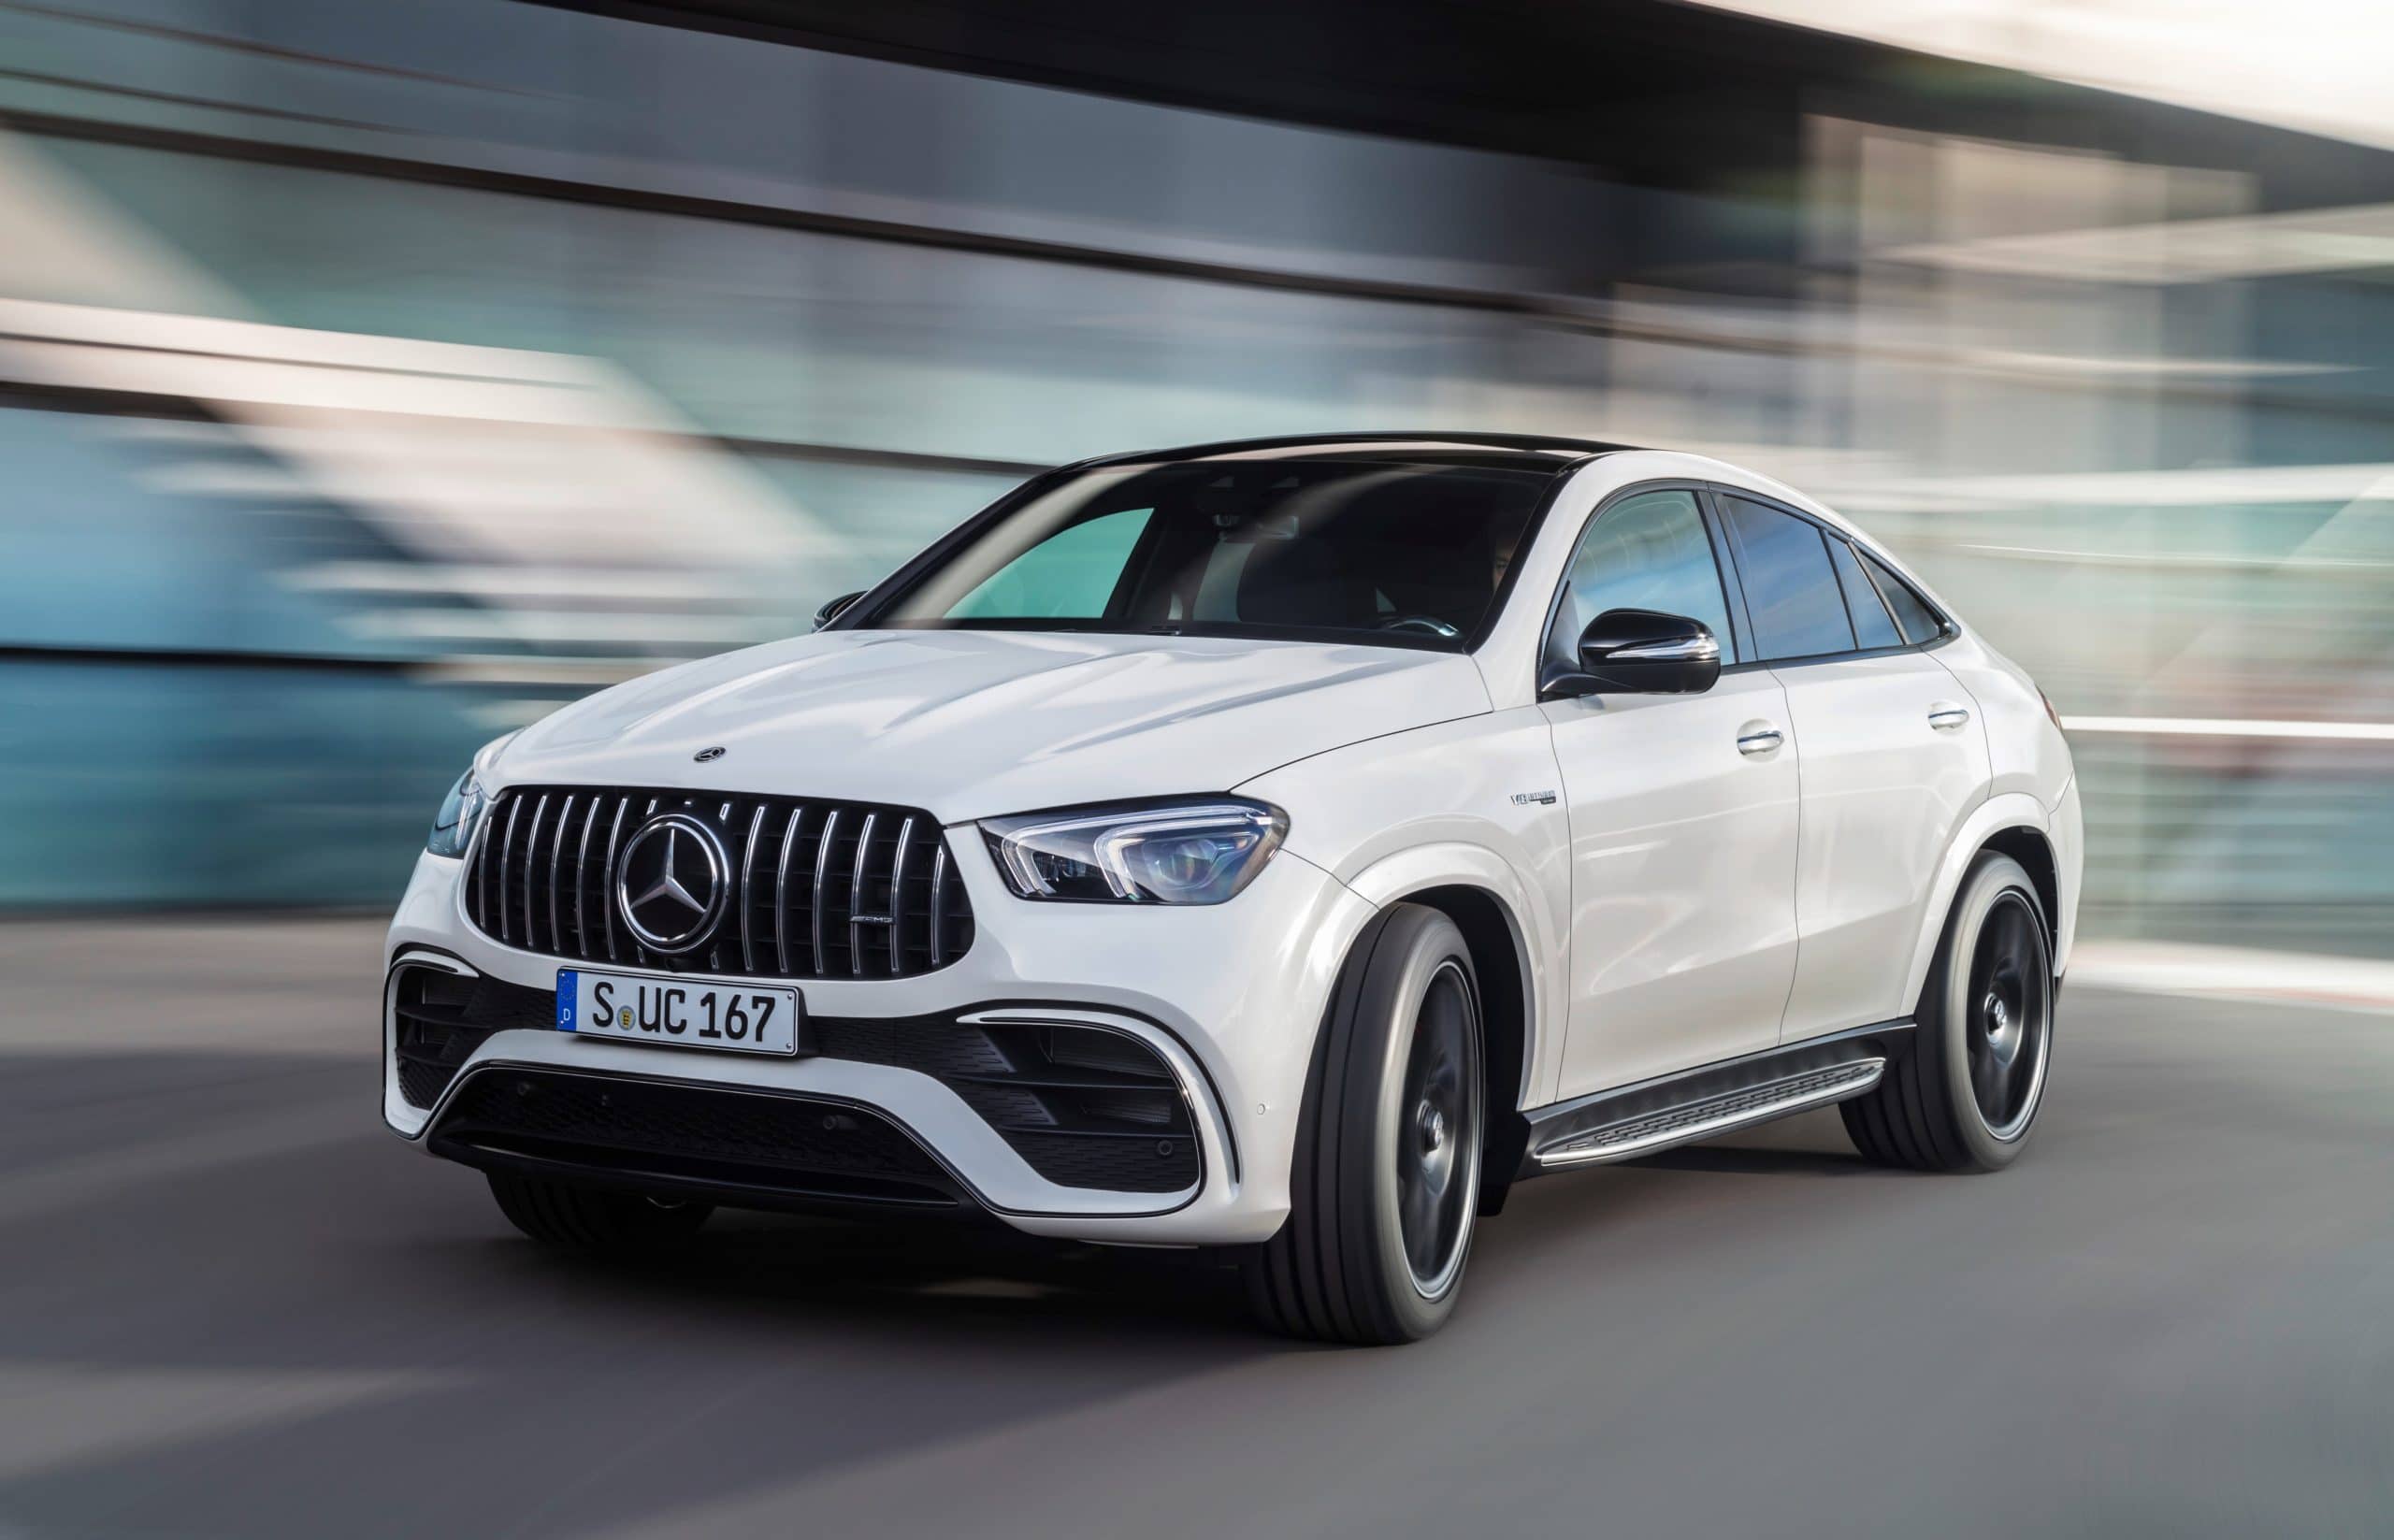 Mercedes-AMG GLE 63 S Coupe offers a comprehensive suite of safety, performance and comfort features